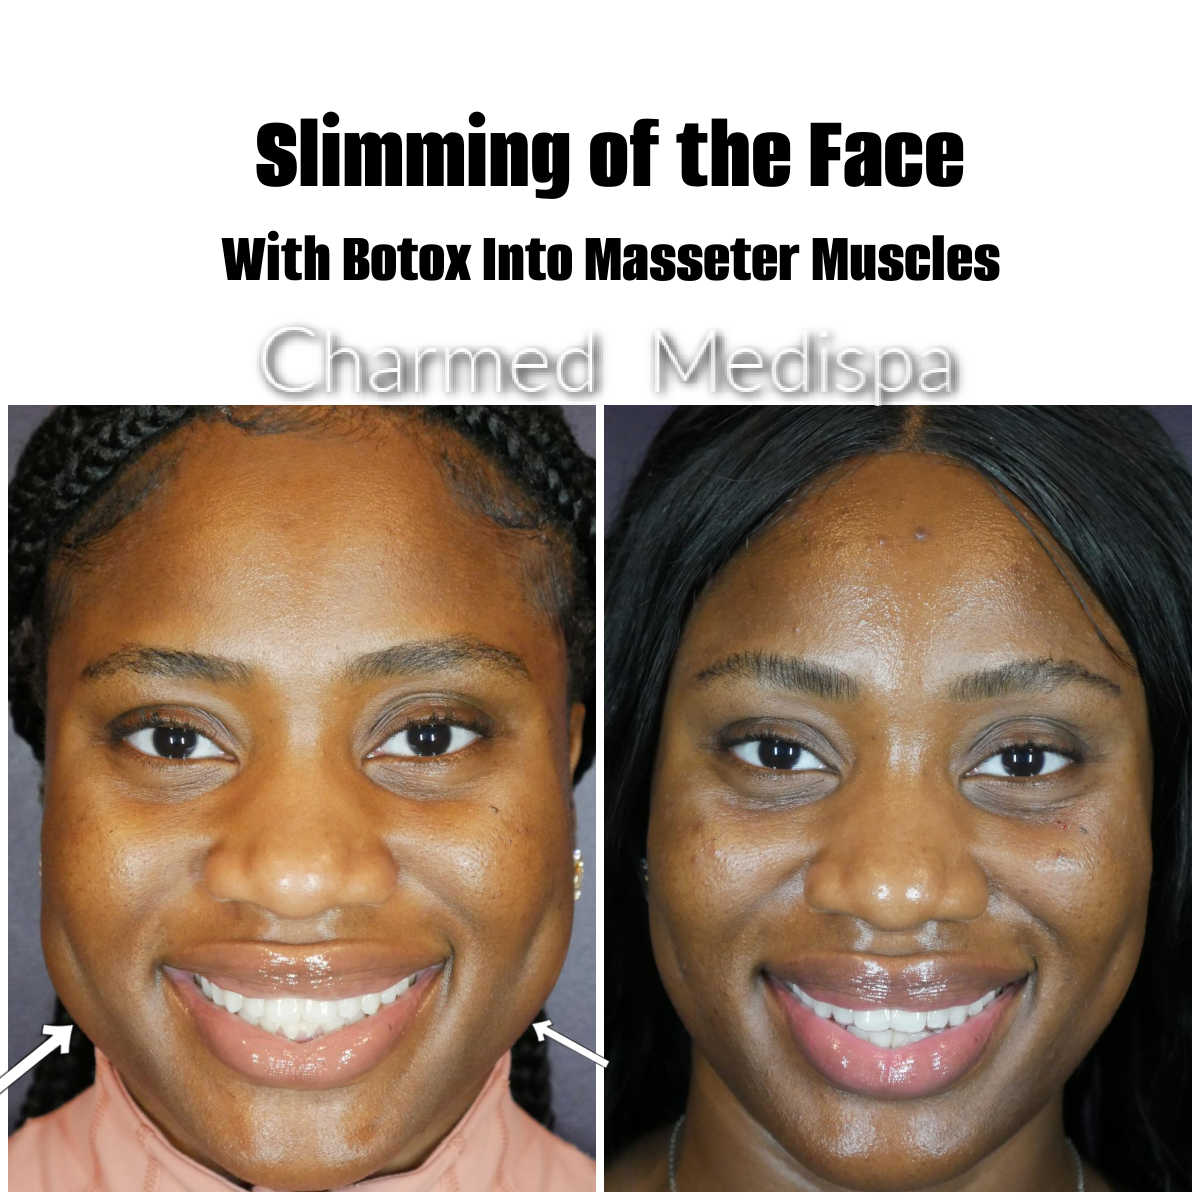 Botox Masseter Muscles To Slim Face And Improve Teeth Grinding